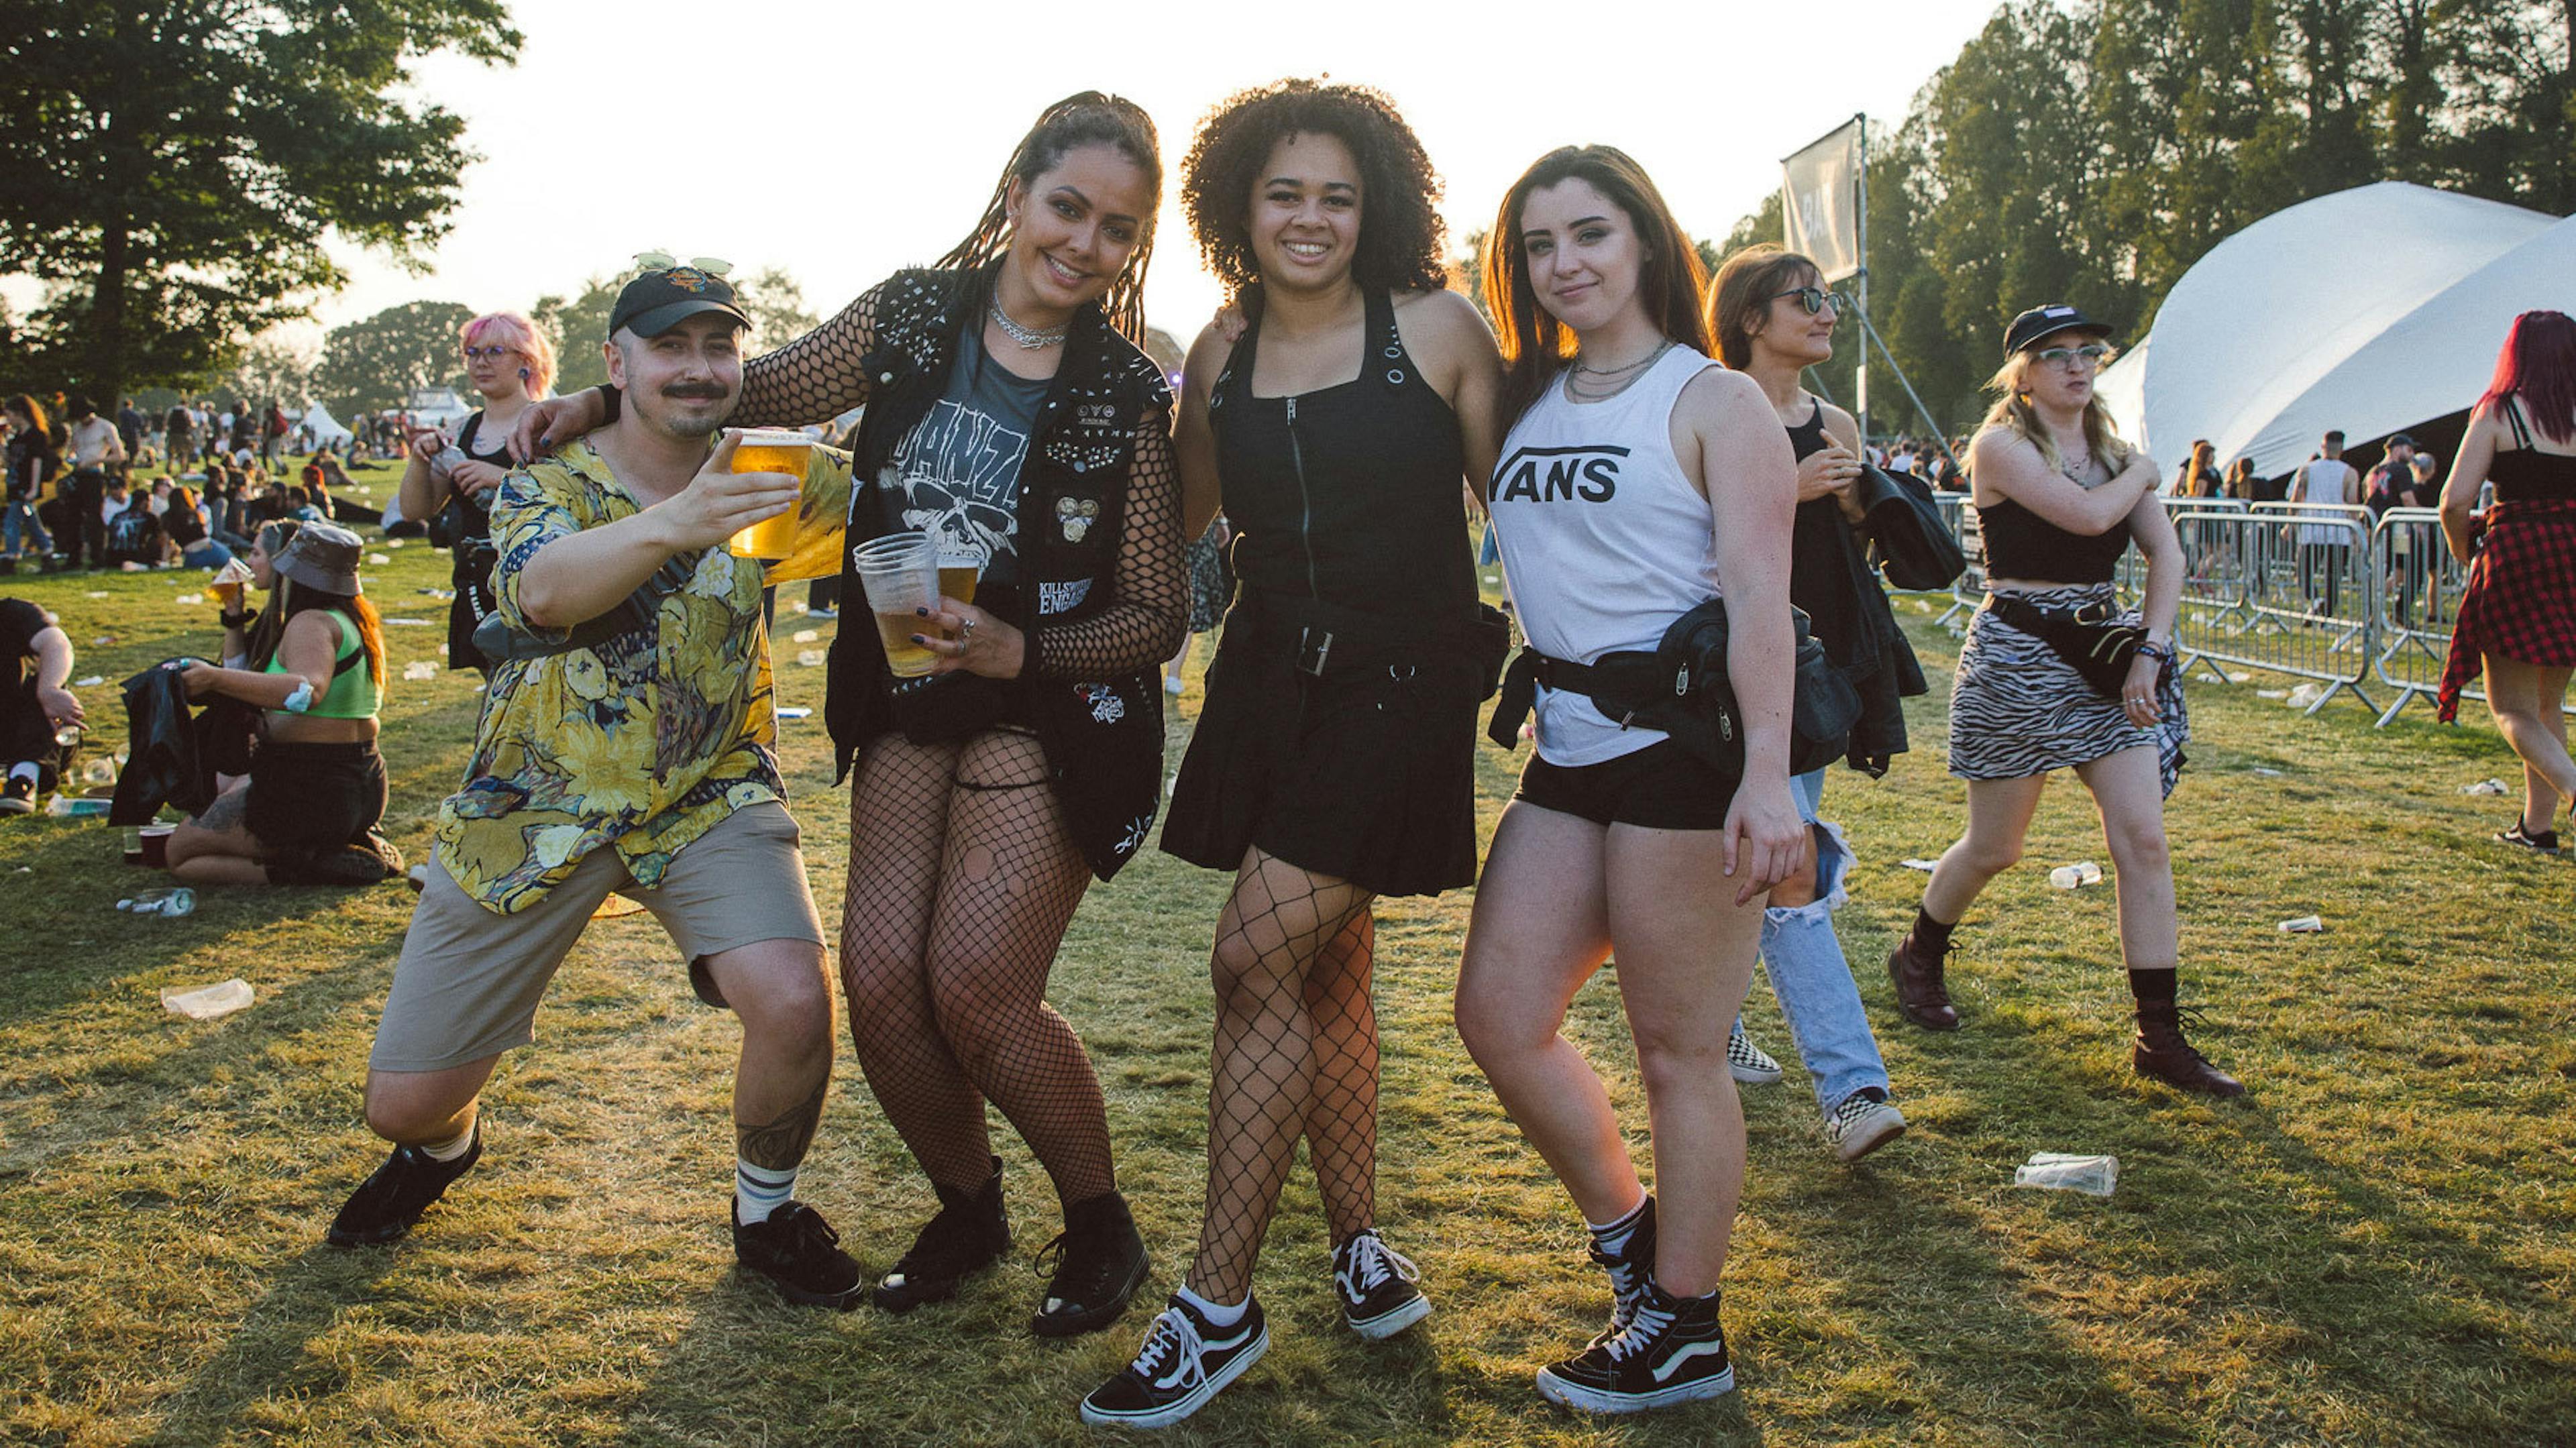 In pictures: The faces of Slam Dunk Festival 2021